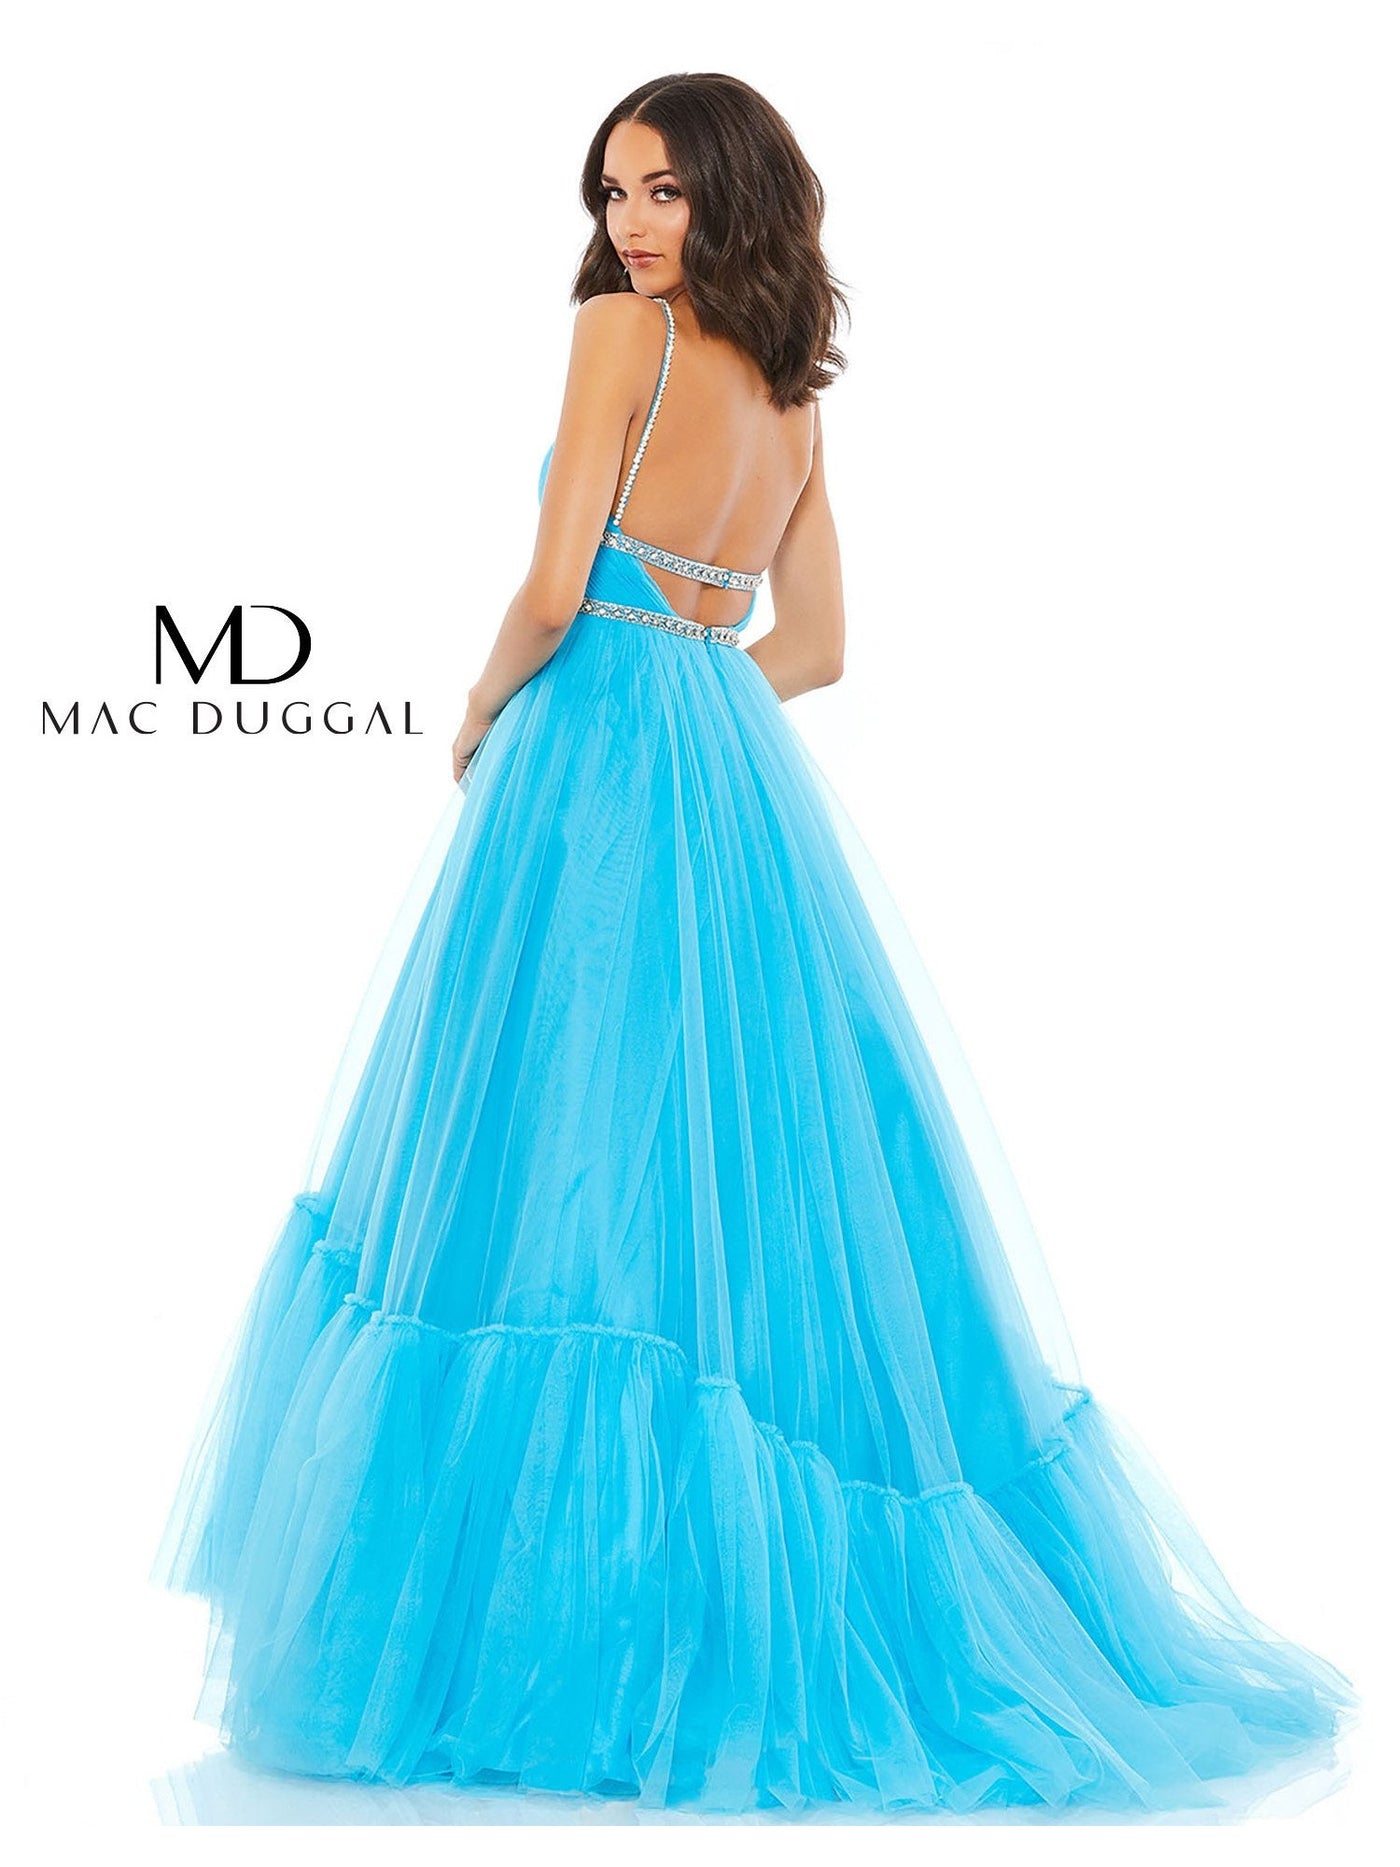 MAC DUGGAL Womens Turquoise Pleated Zippered Tiered Embellished Lined Sleeveless V Neck Full-Length Prom Gown Dress 8